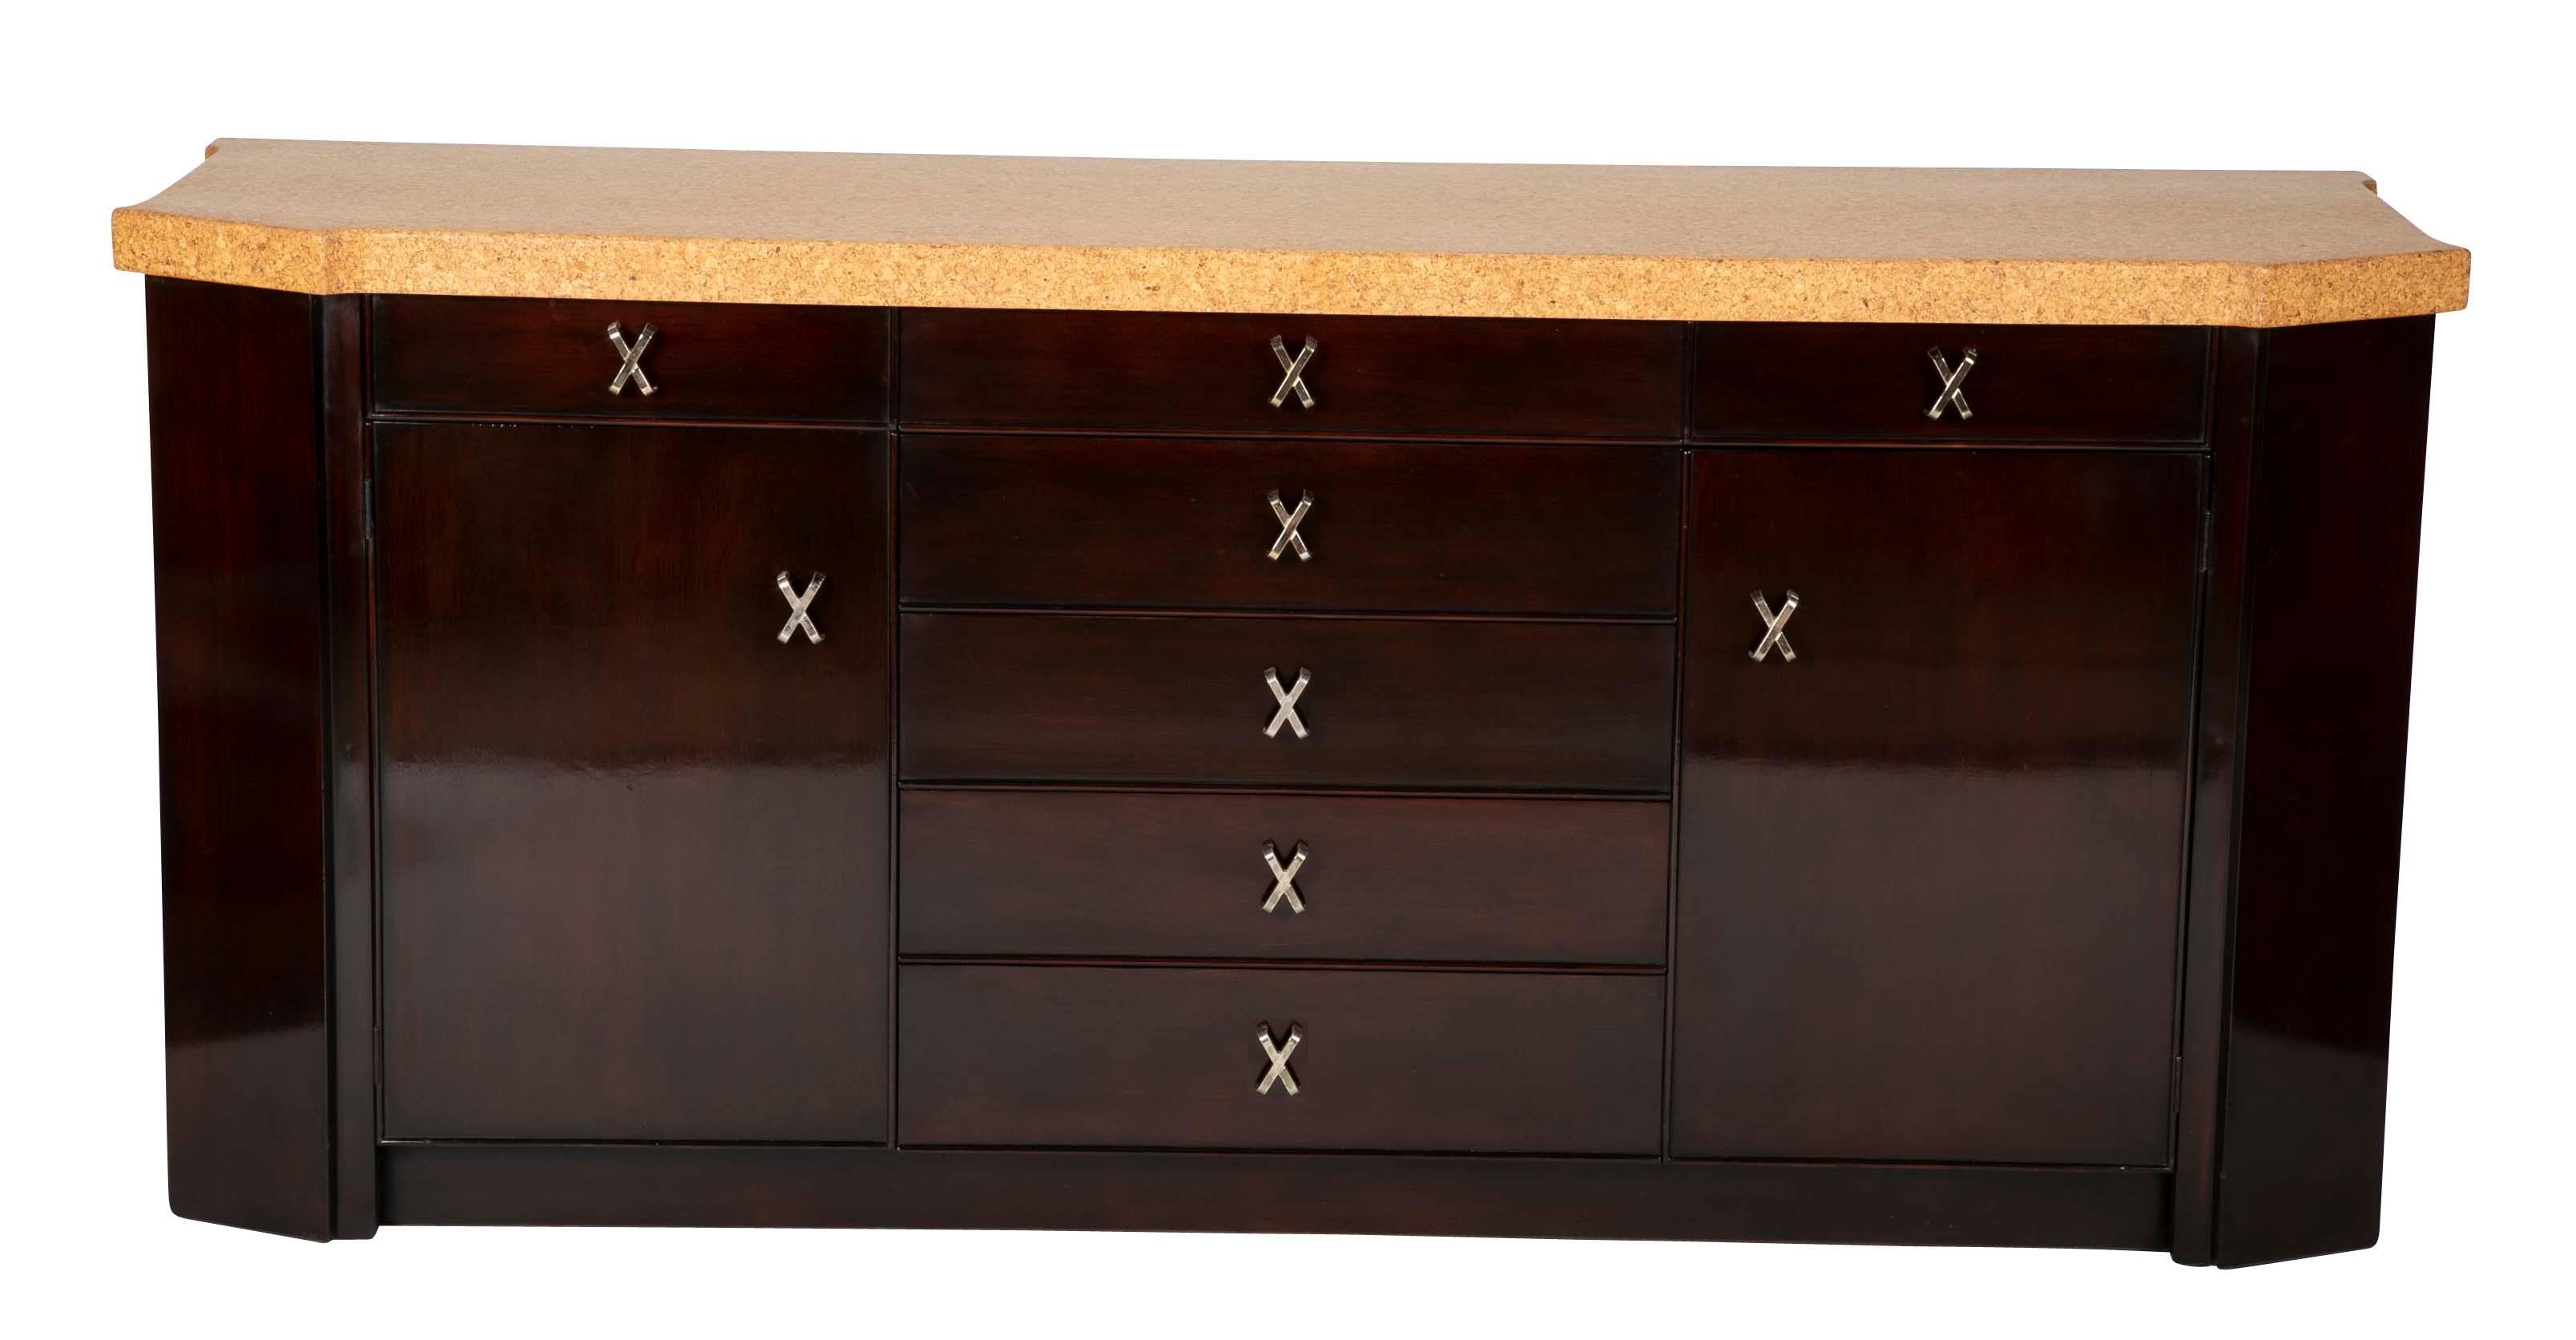 A credenza designed by Paul T. Frankl for Johnson furniture. Mahogany with cork top and gilt X pulls.